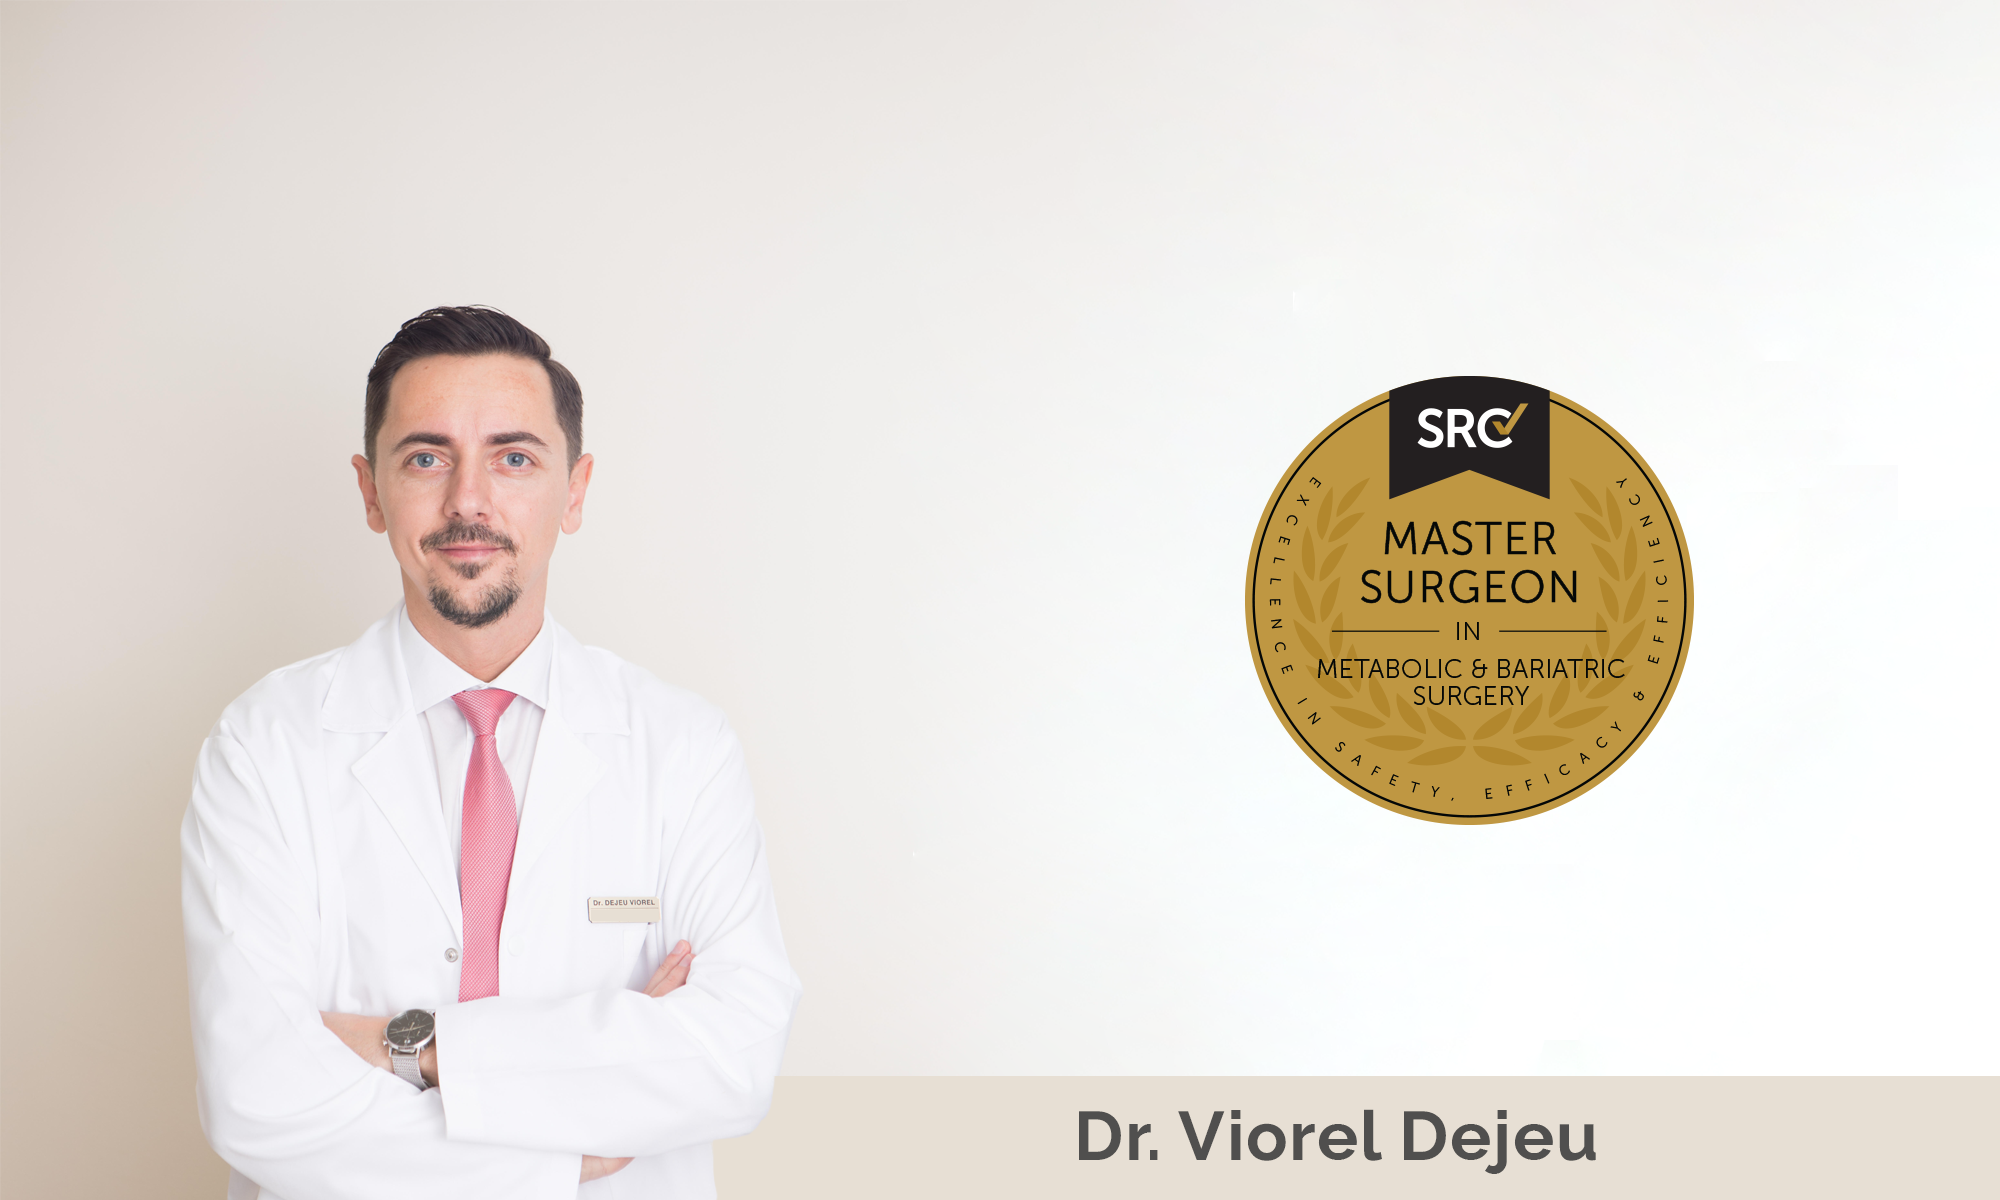 Dr. Viorel Dejeu achieved SRC’s Master Surgeon in Bariatric and Metabolic Surgery Accreditation